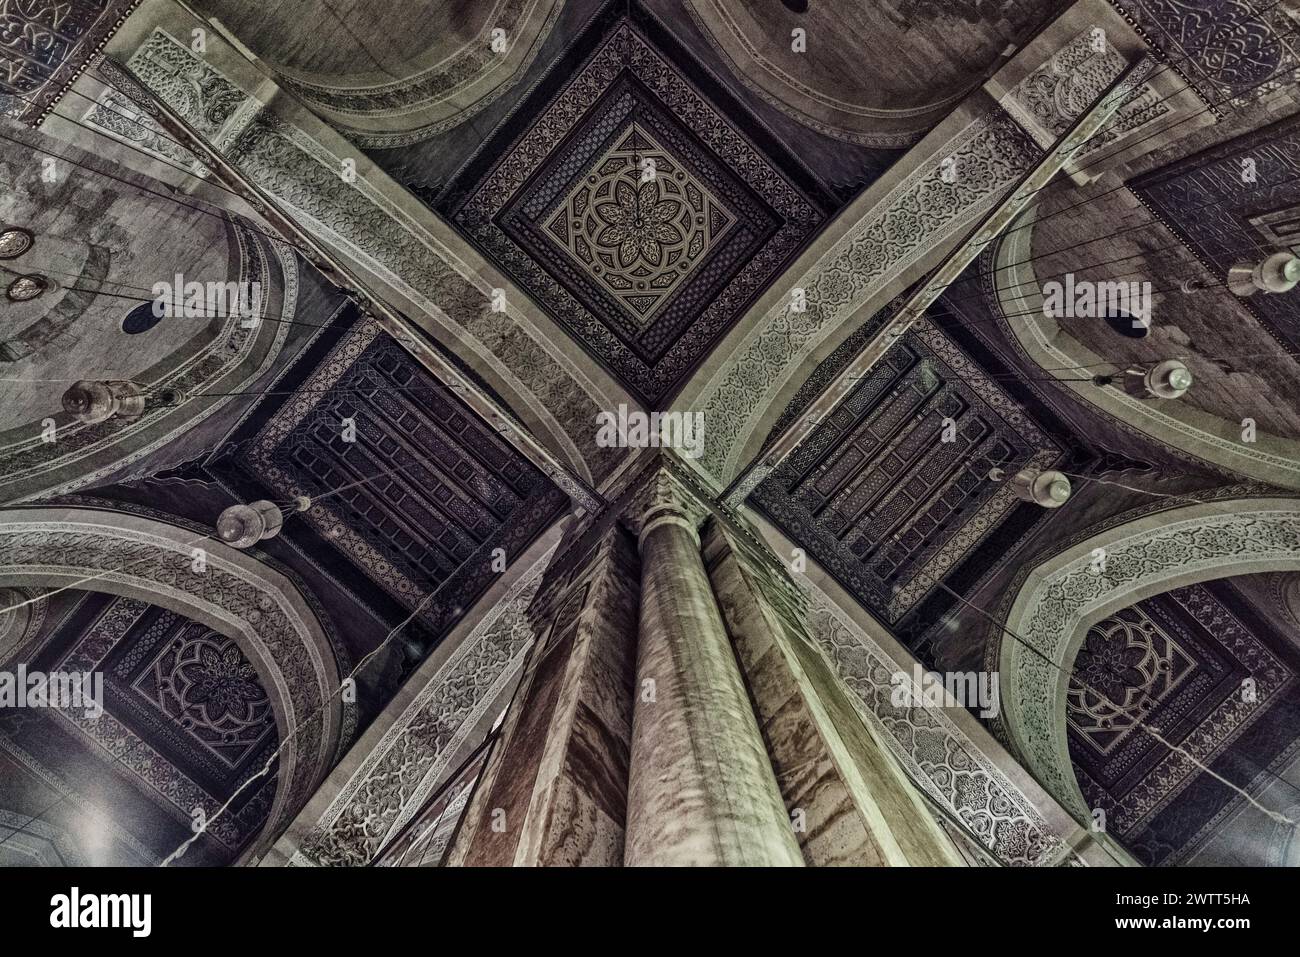 View of interior details at Al-Rifa'i Mosque in Islamic Cairo, Egypt Stock Photo